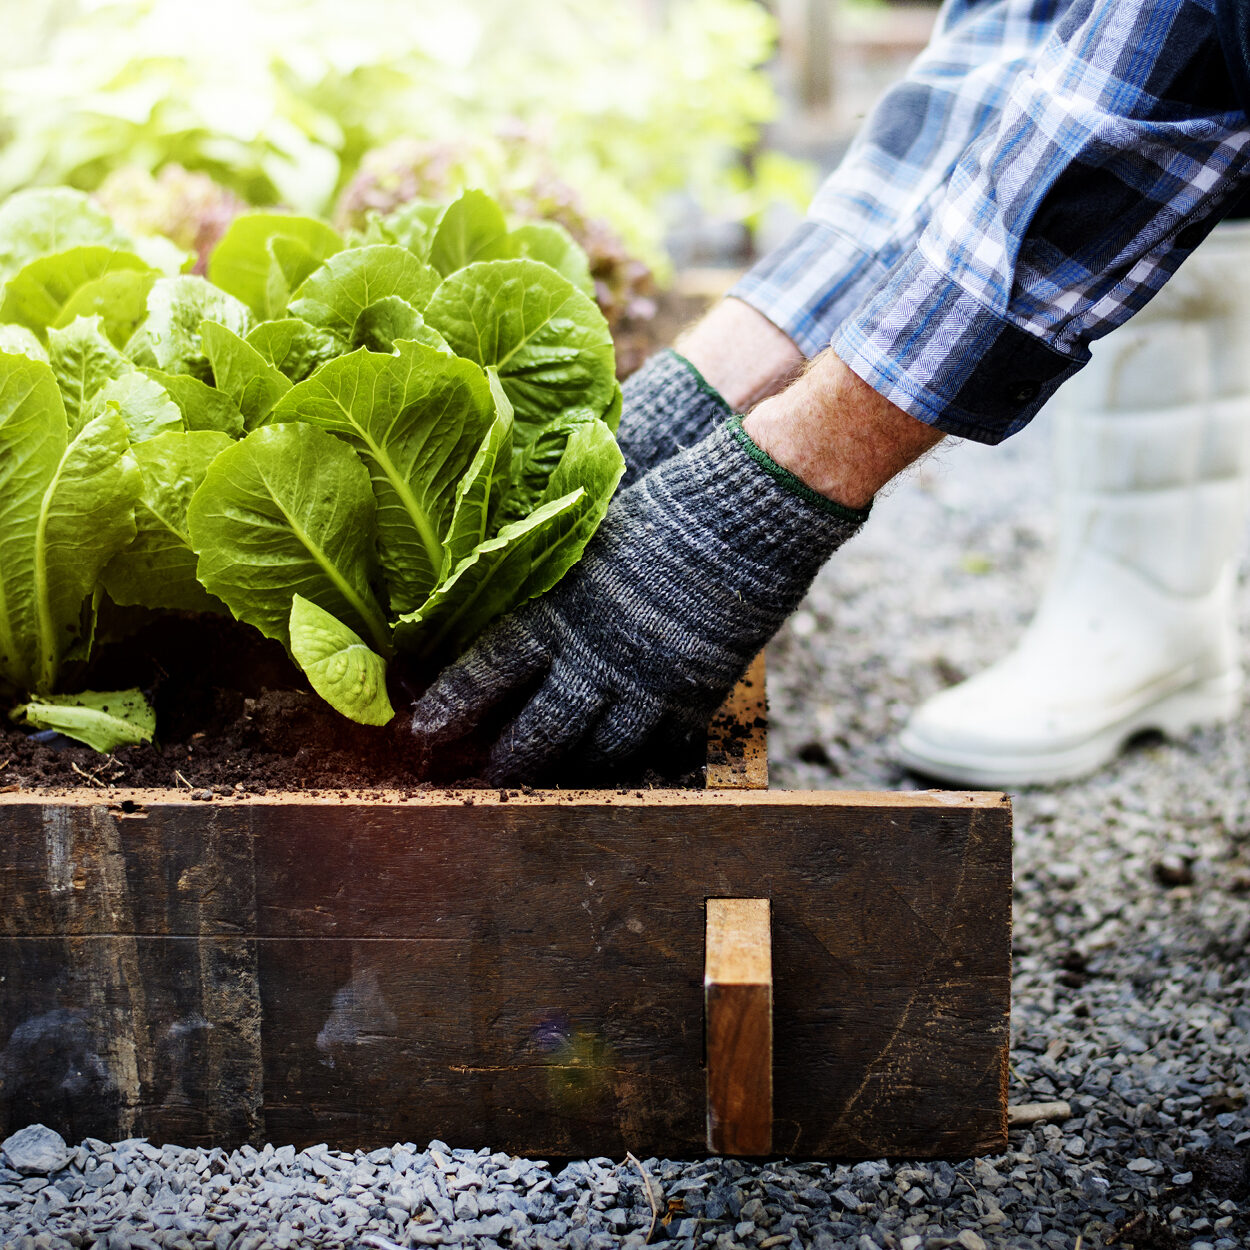 A picture of gloved hands handling lettuce in a garden